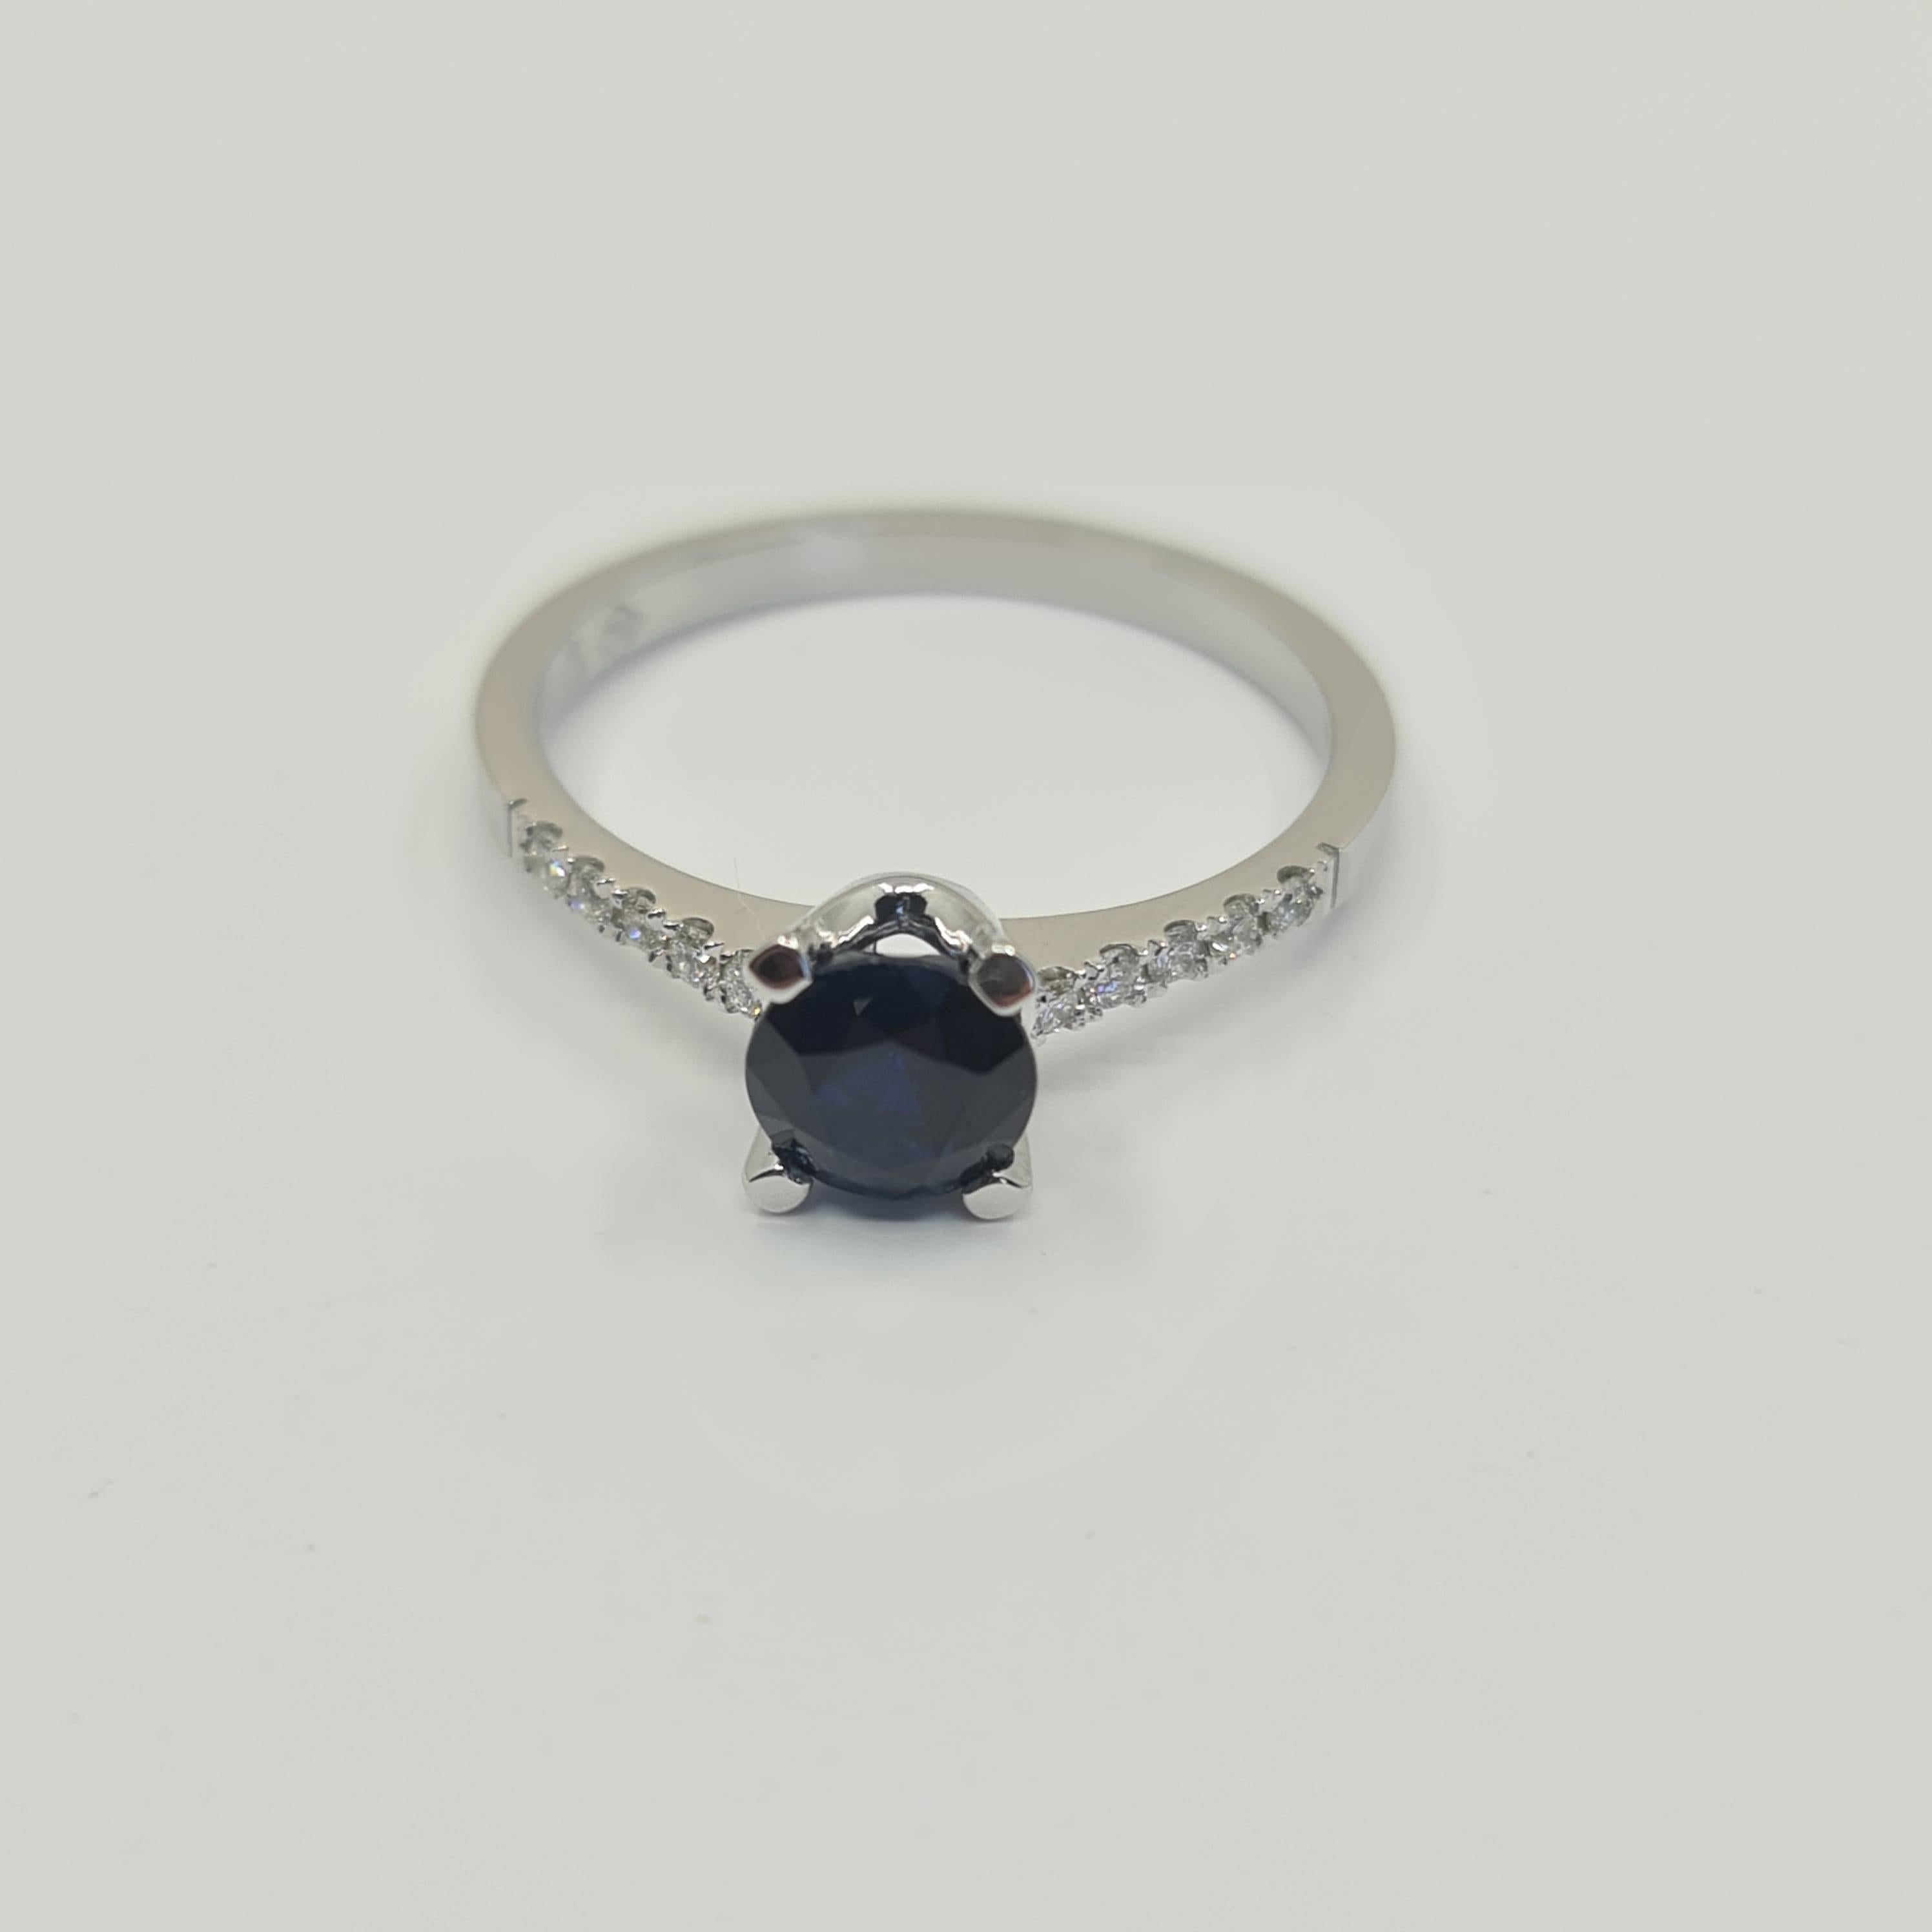 Brilliant Cut GIA Certified 1.03 Carat Natural, not heated, Sapphire and Diamonds Ring For Sale